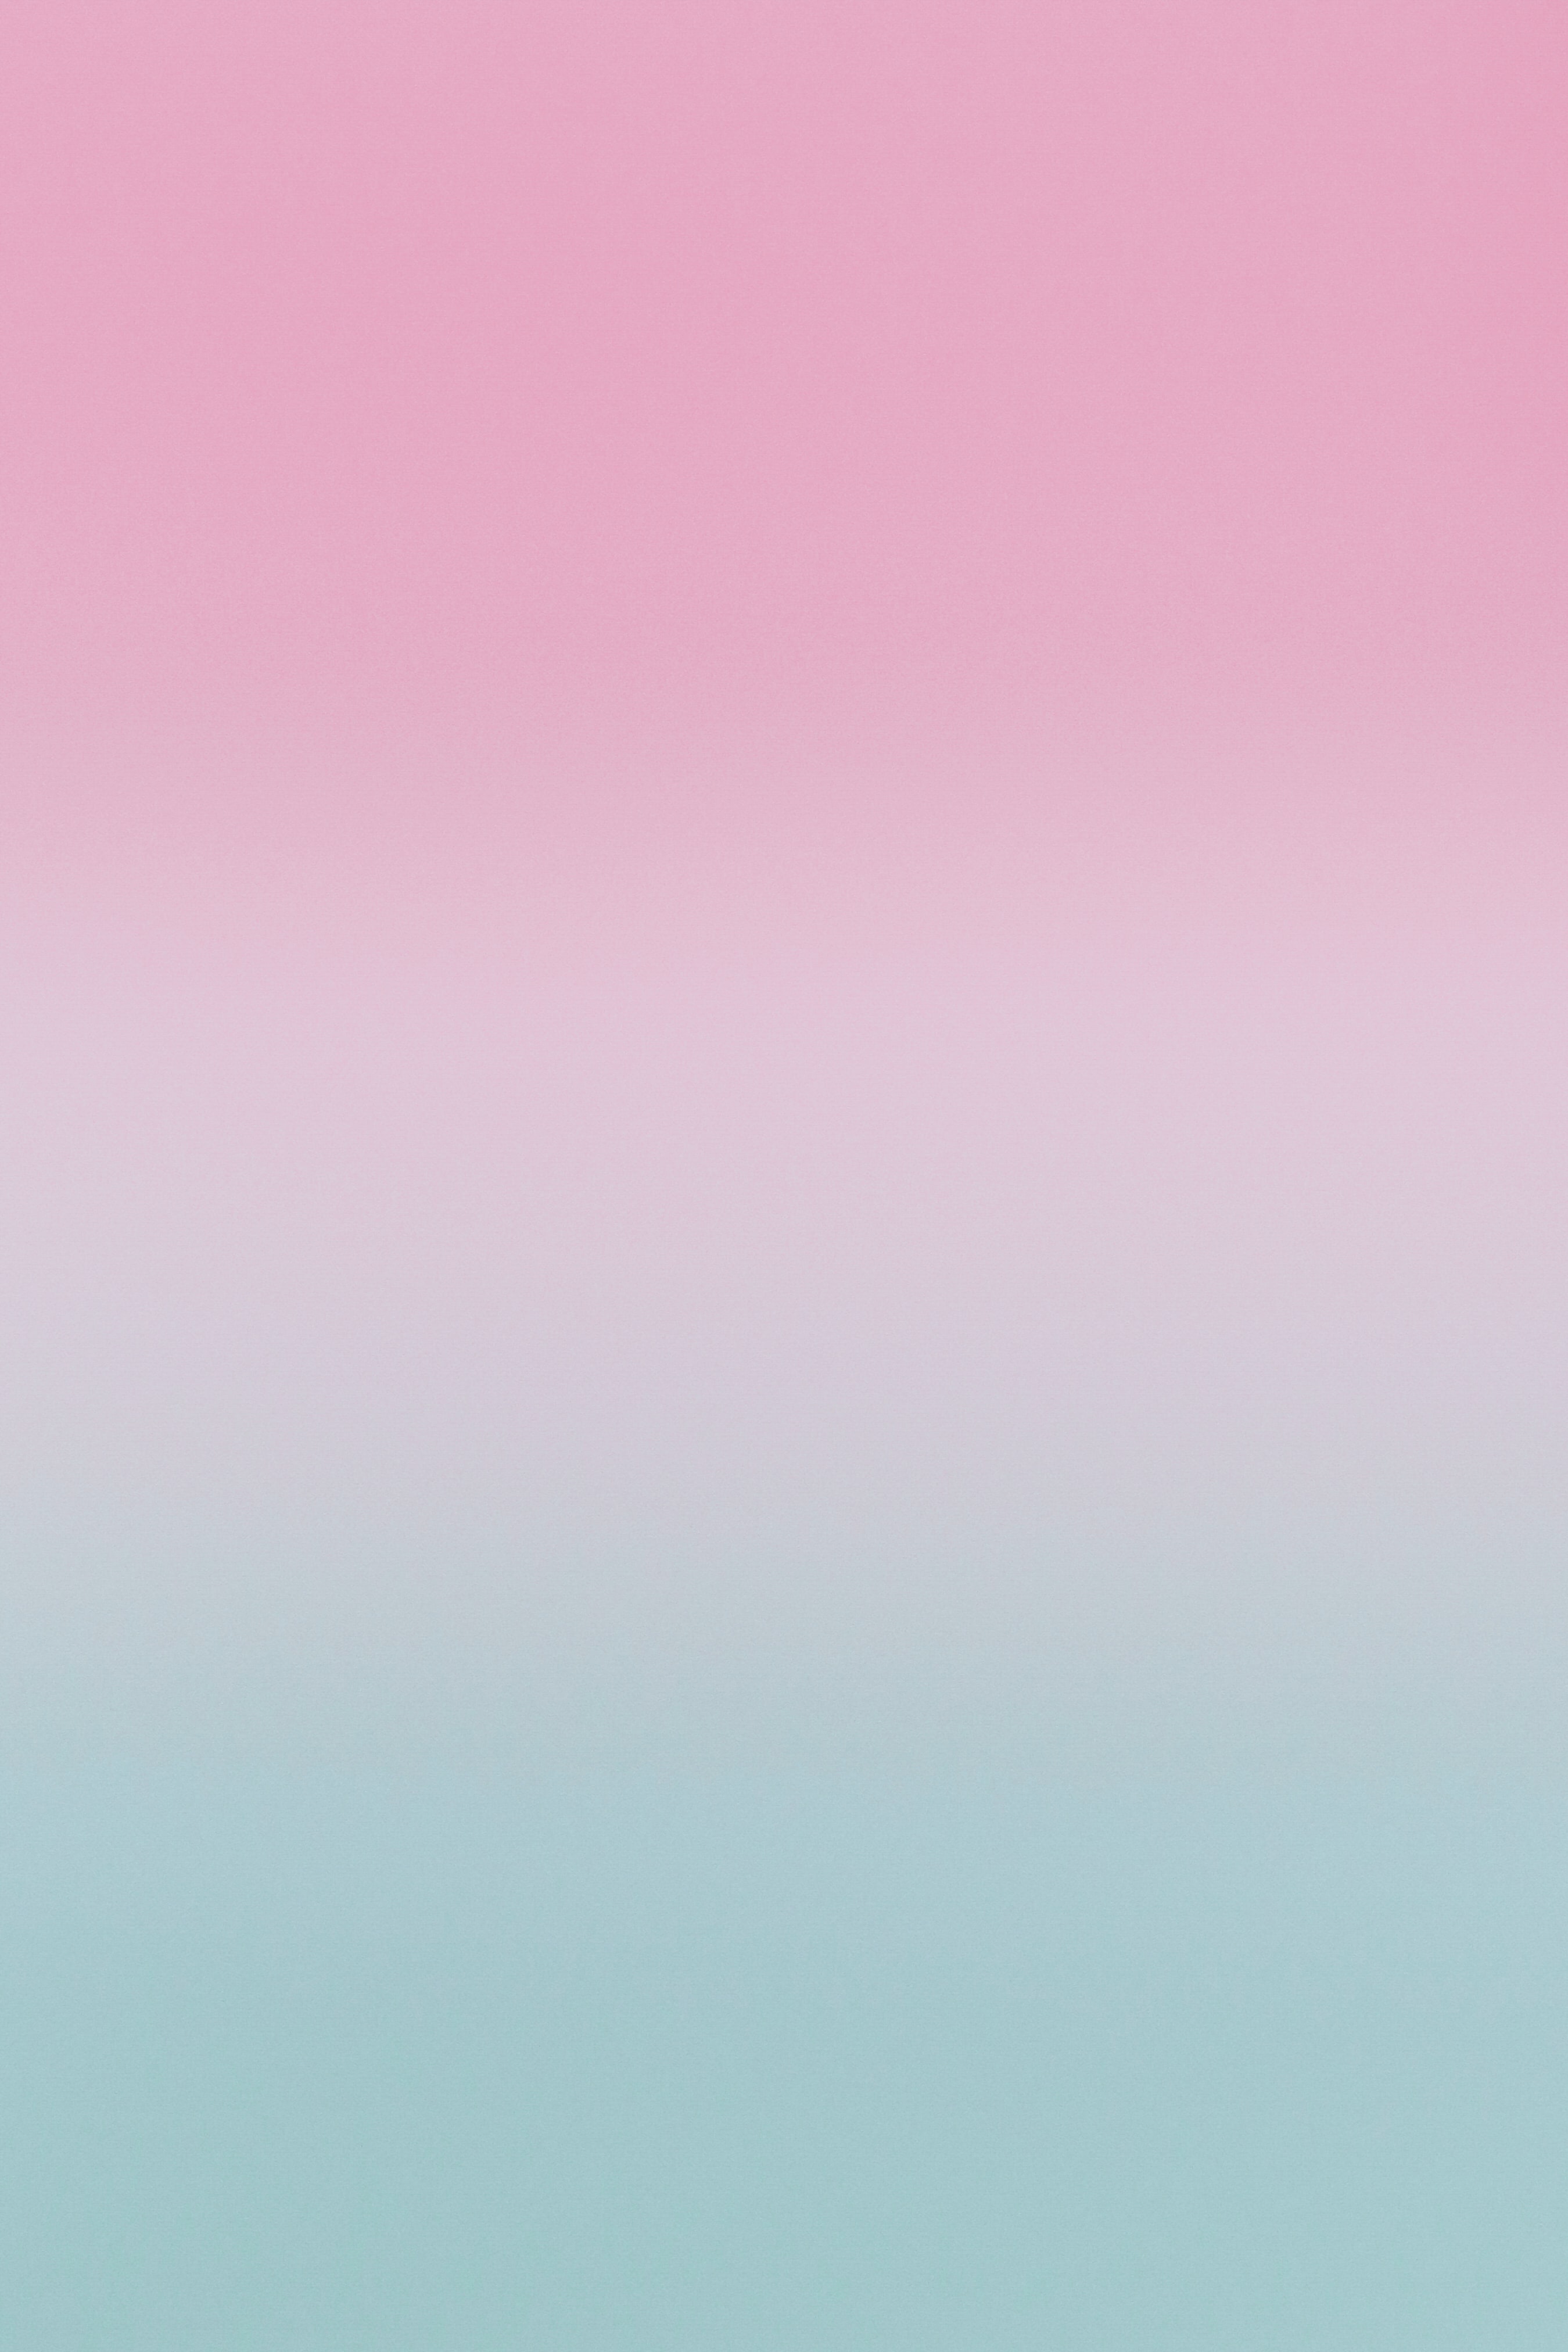 pink, blur, gradient, blue, abstract, smooth Full HD